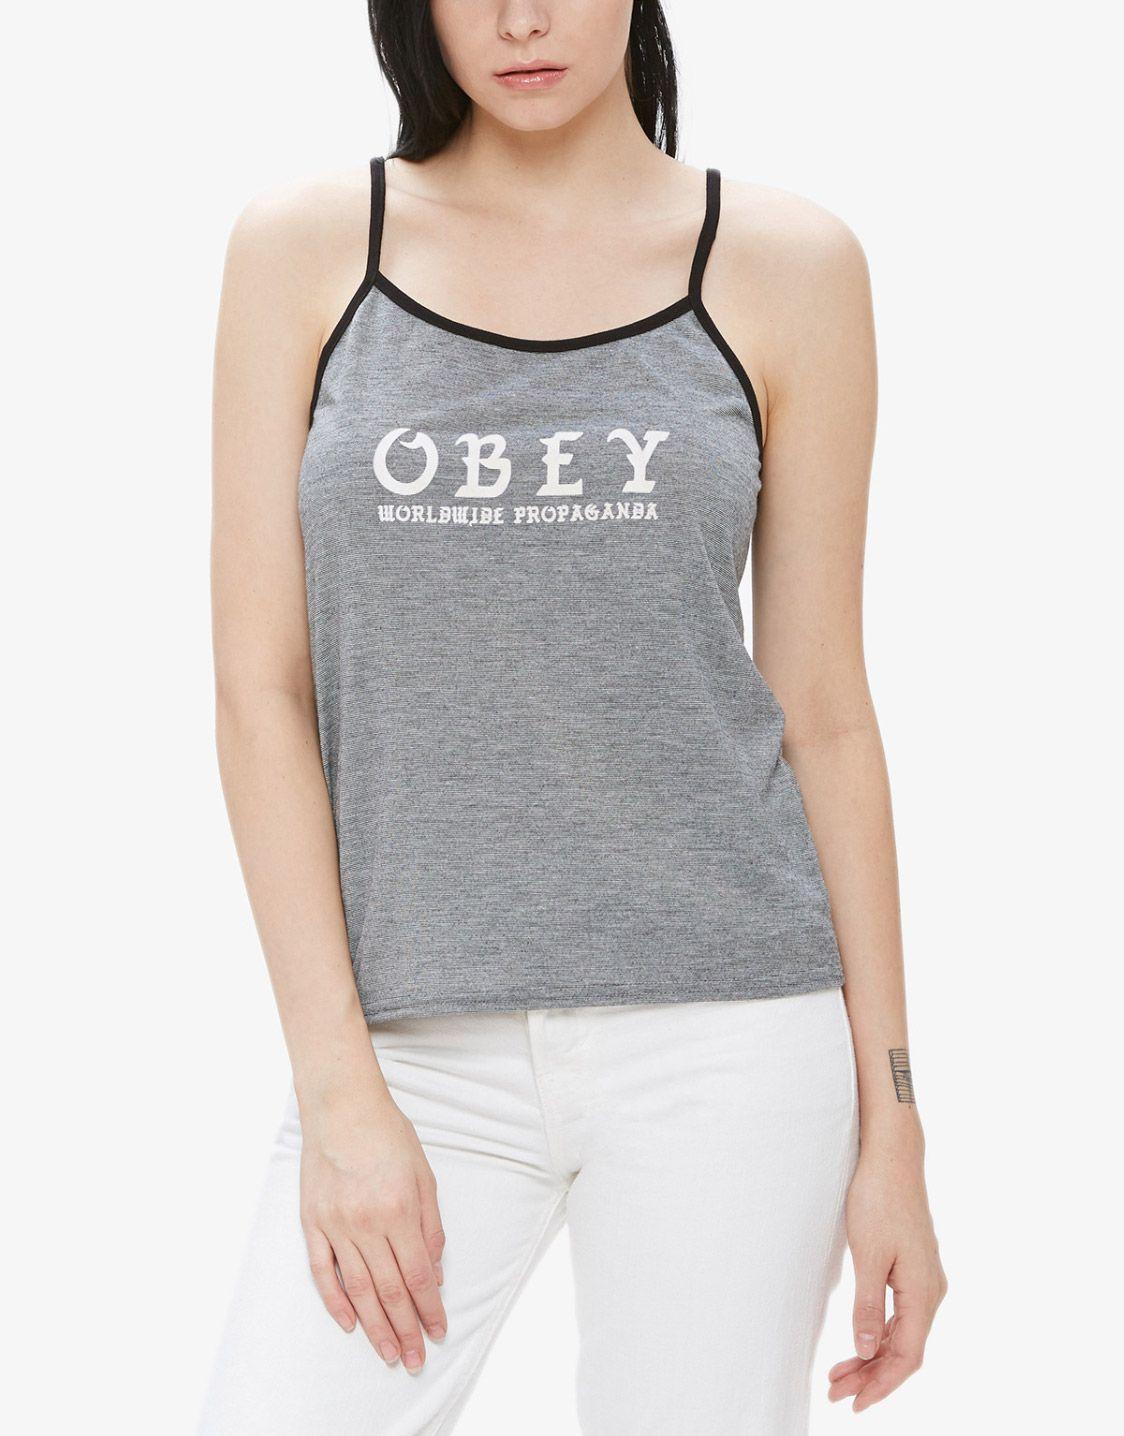 OBEY Clothing Old Logo - OBEY Clothing Old world tank top - Shop OBEY Women at OnTheBlock